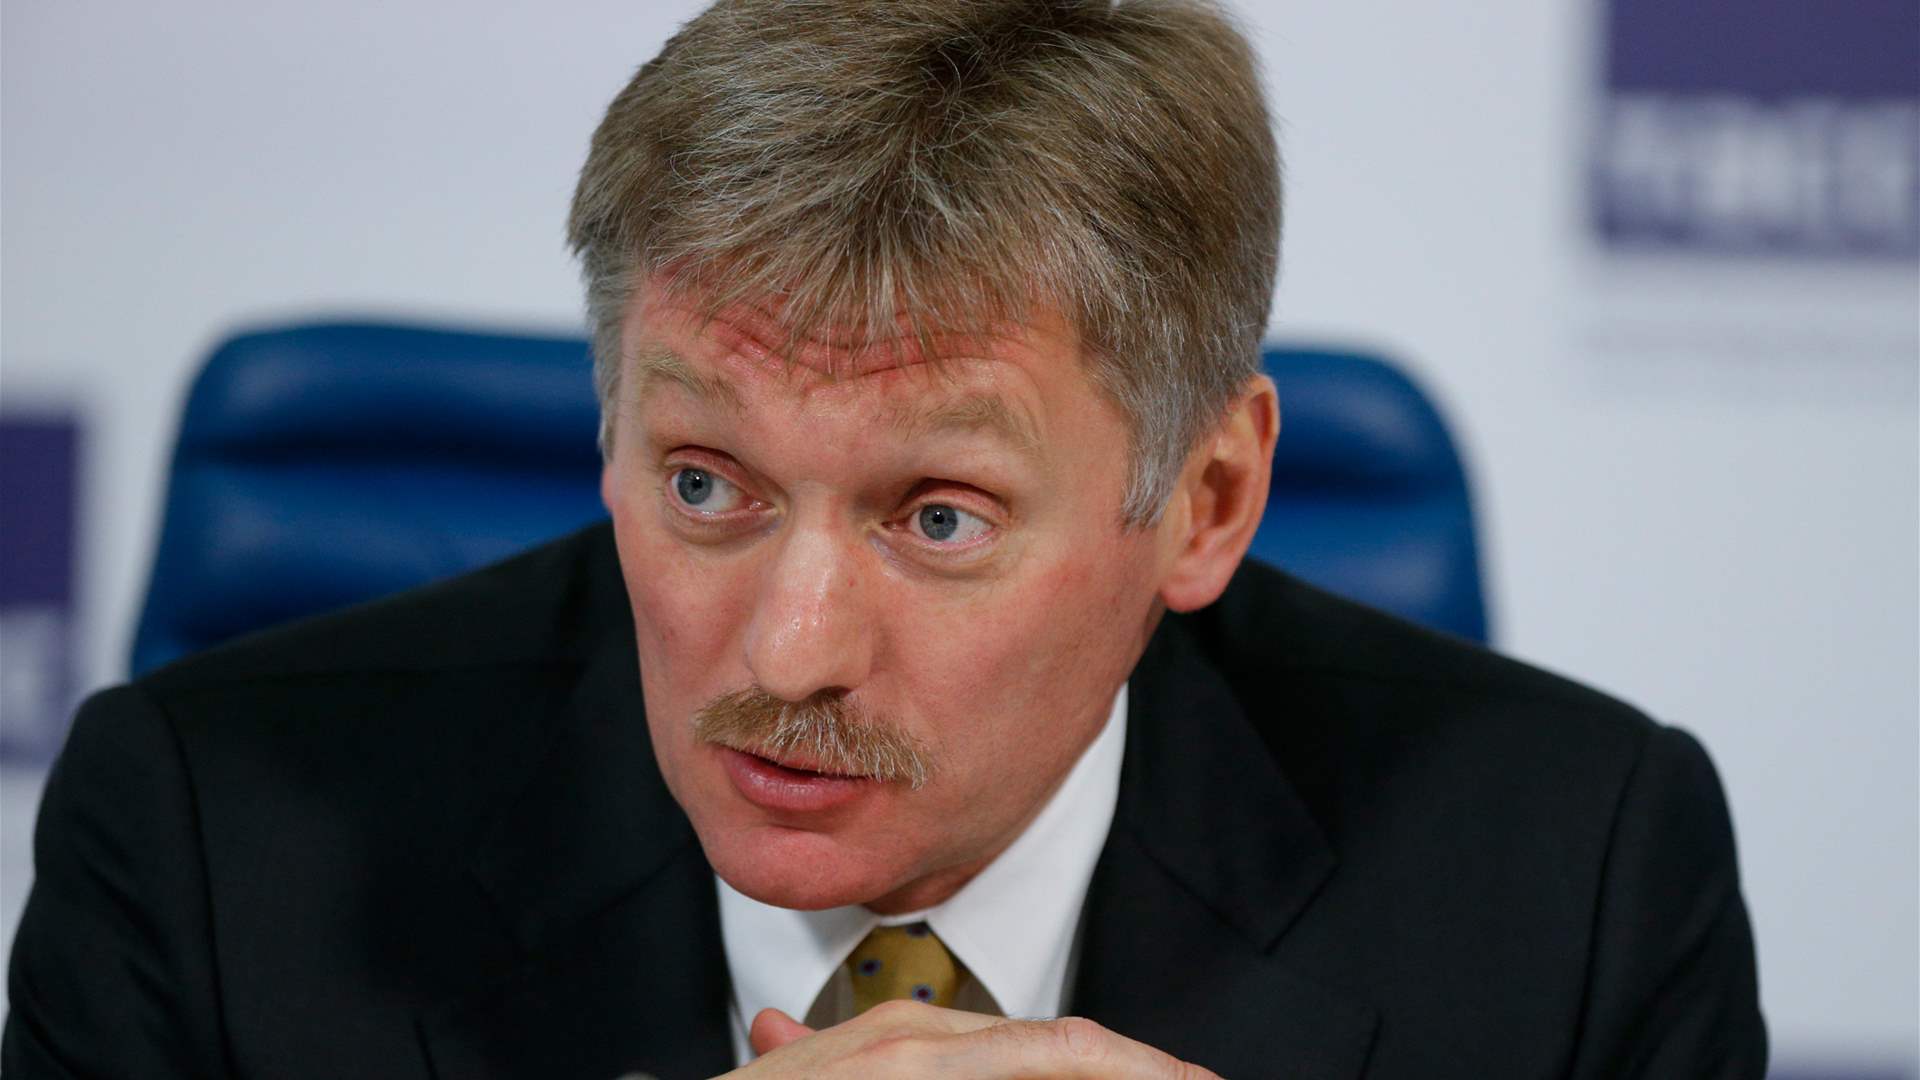 Kremlin calls for all sides to de-escalate when asked about potential US strikes on Iran